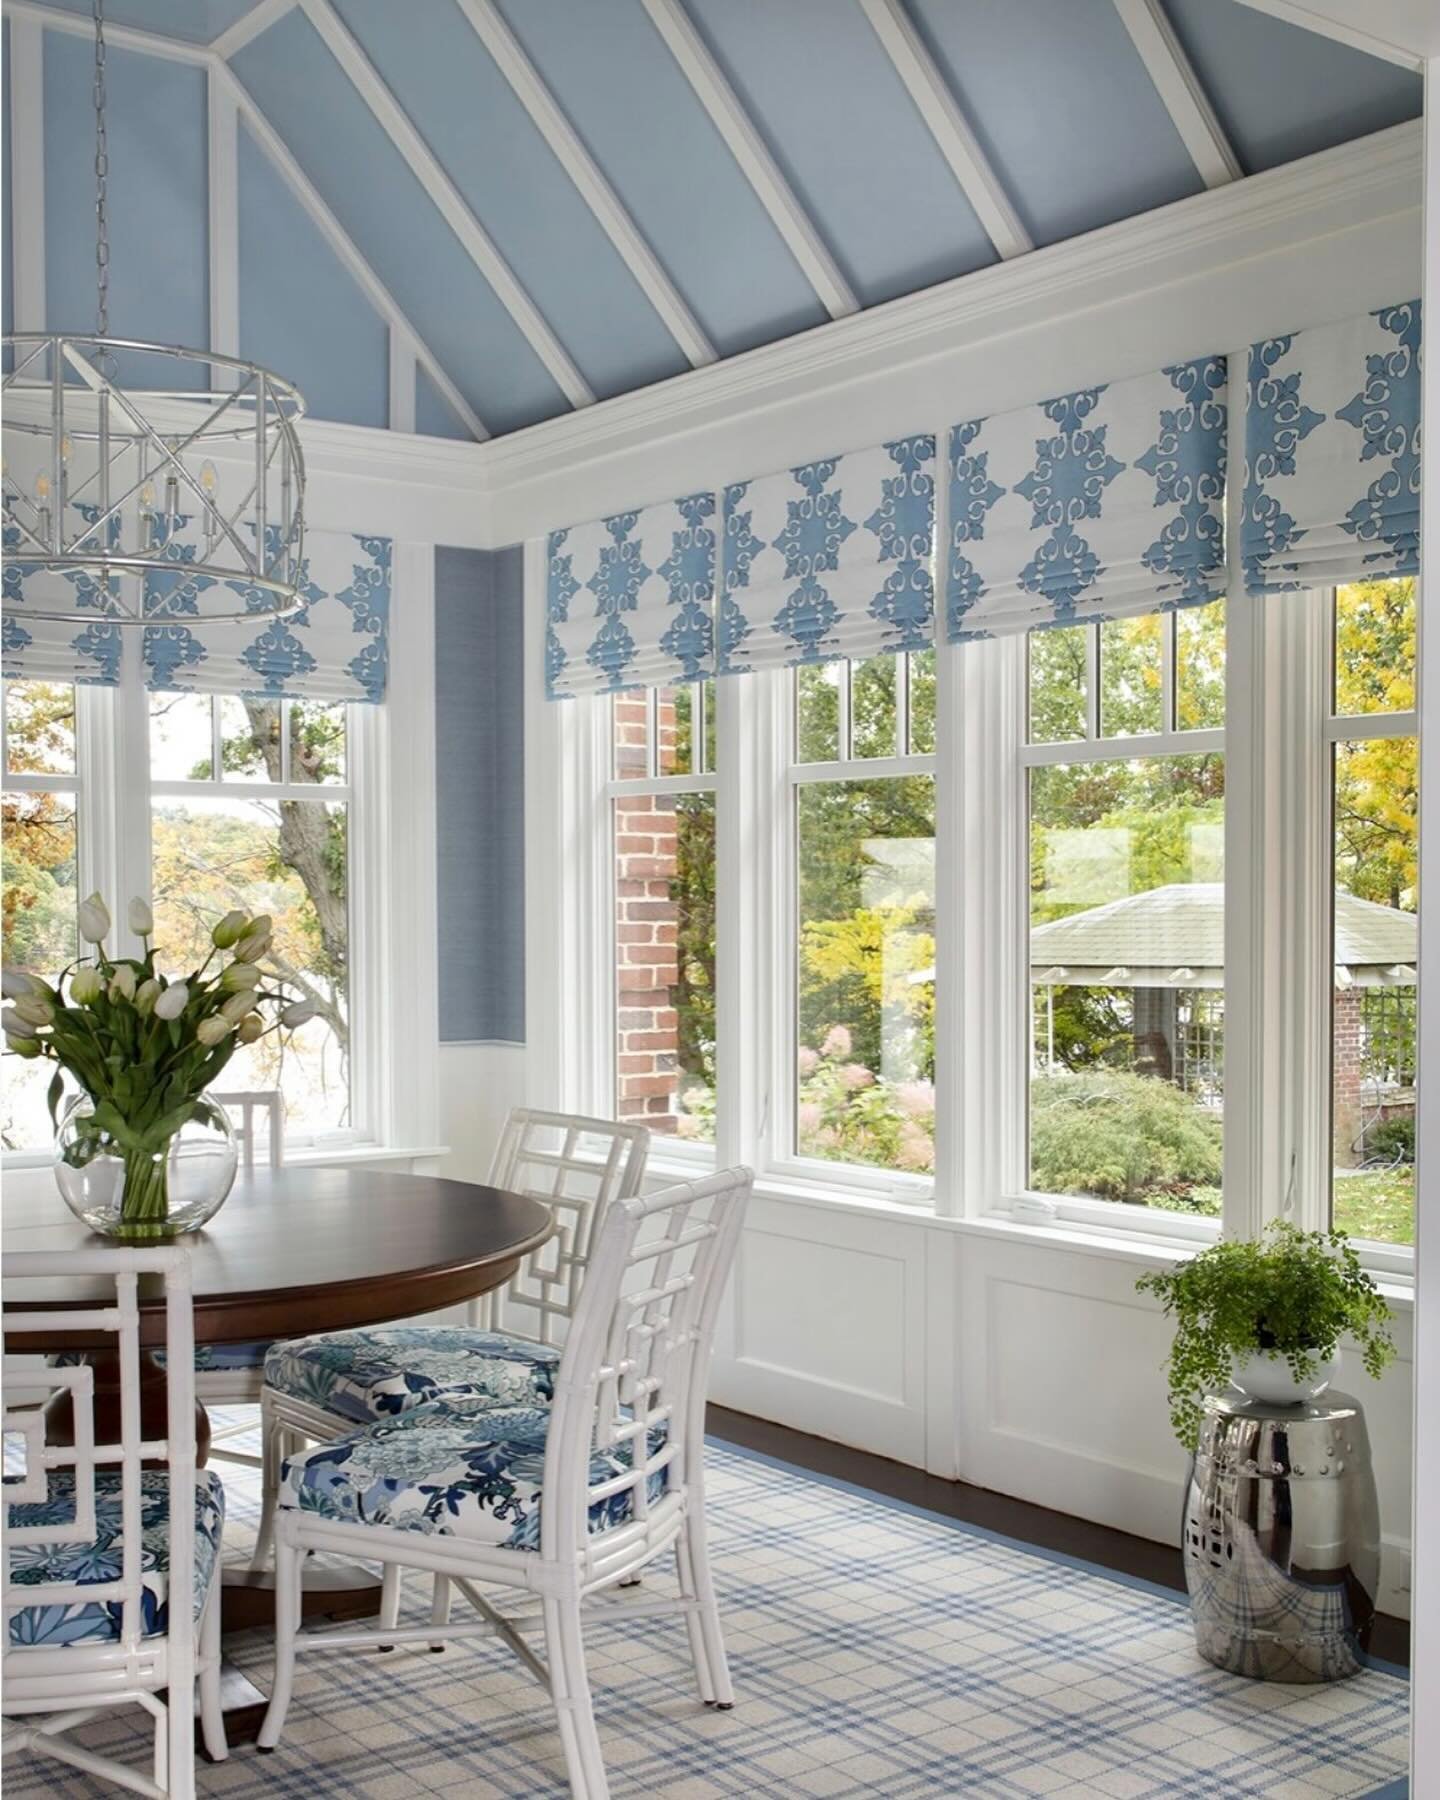 Roman shades can elevate any room without compromising the light or the amazing view!
.
.
.
#romanshades #customwindowtreatments #windowtreatments #windowtreatmentsdesign #windowtreatmentideas #gooddesignisforever #decorinspo #interiordesign #designi